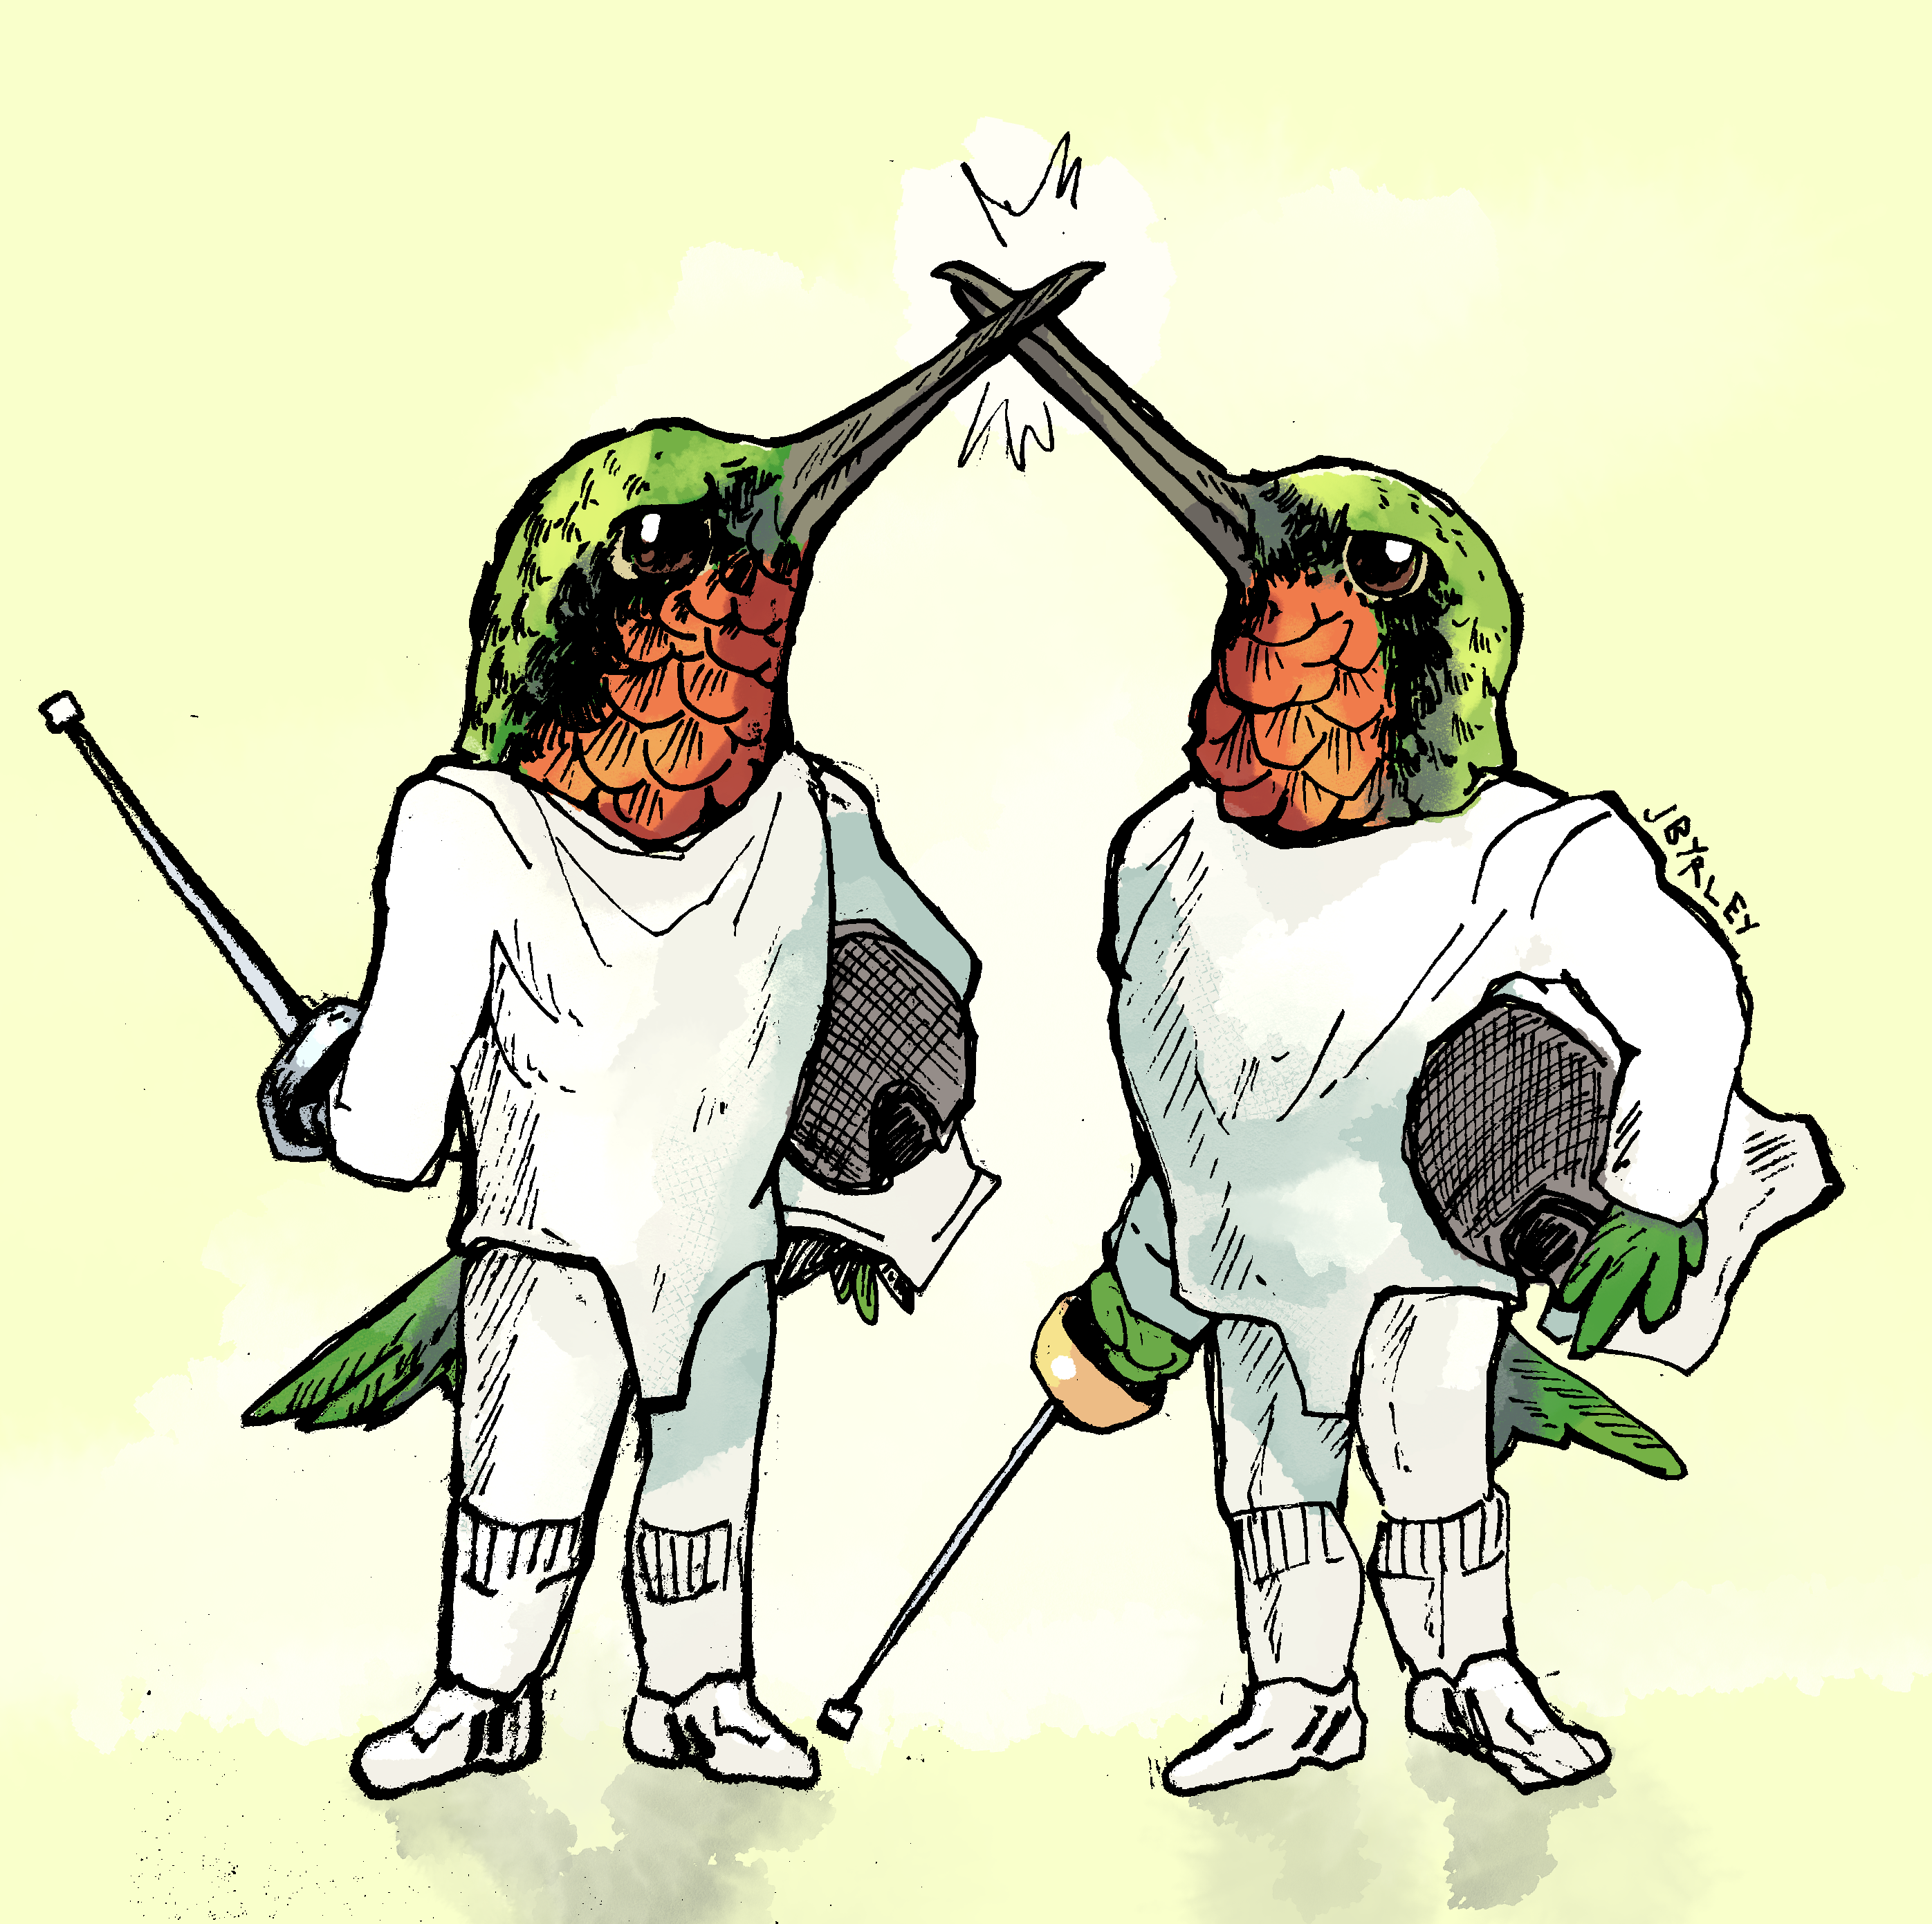 Two illustrated hummingbirds in fencing gear stand beak-to-beak.